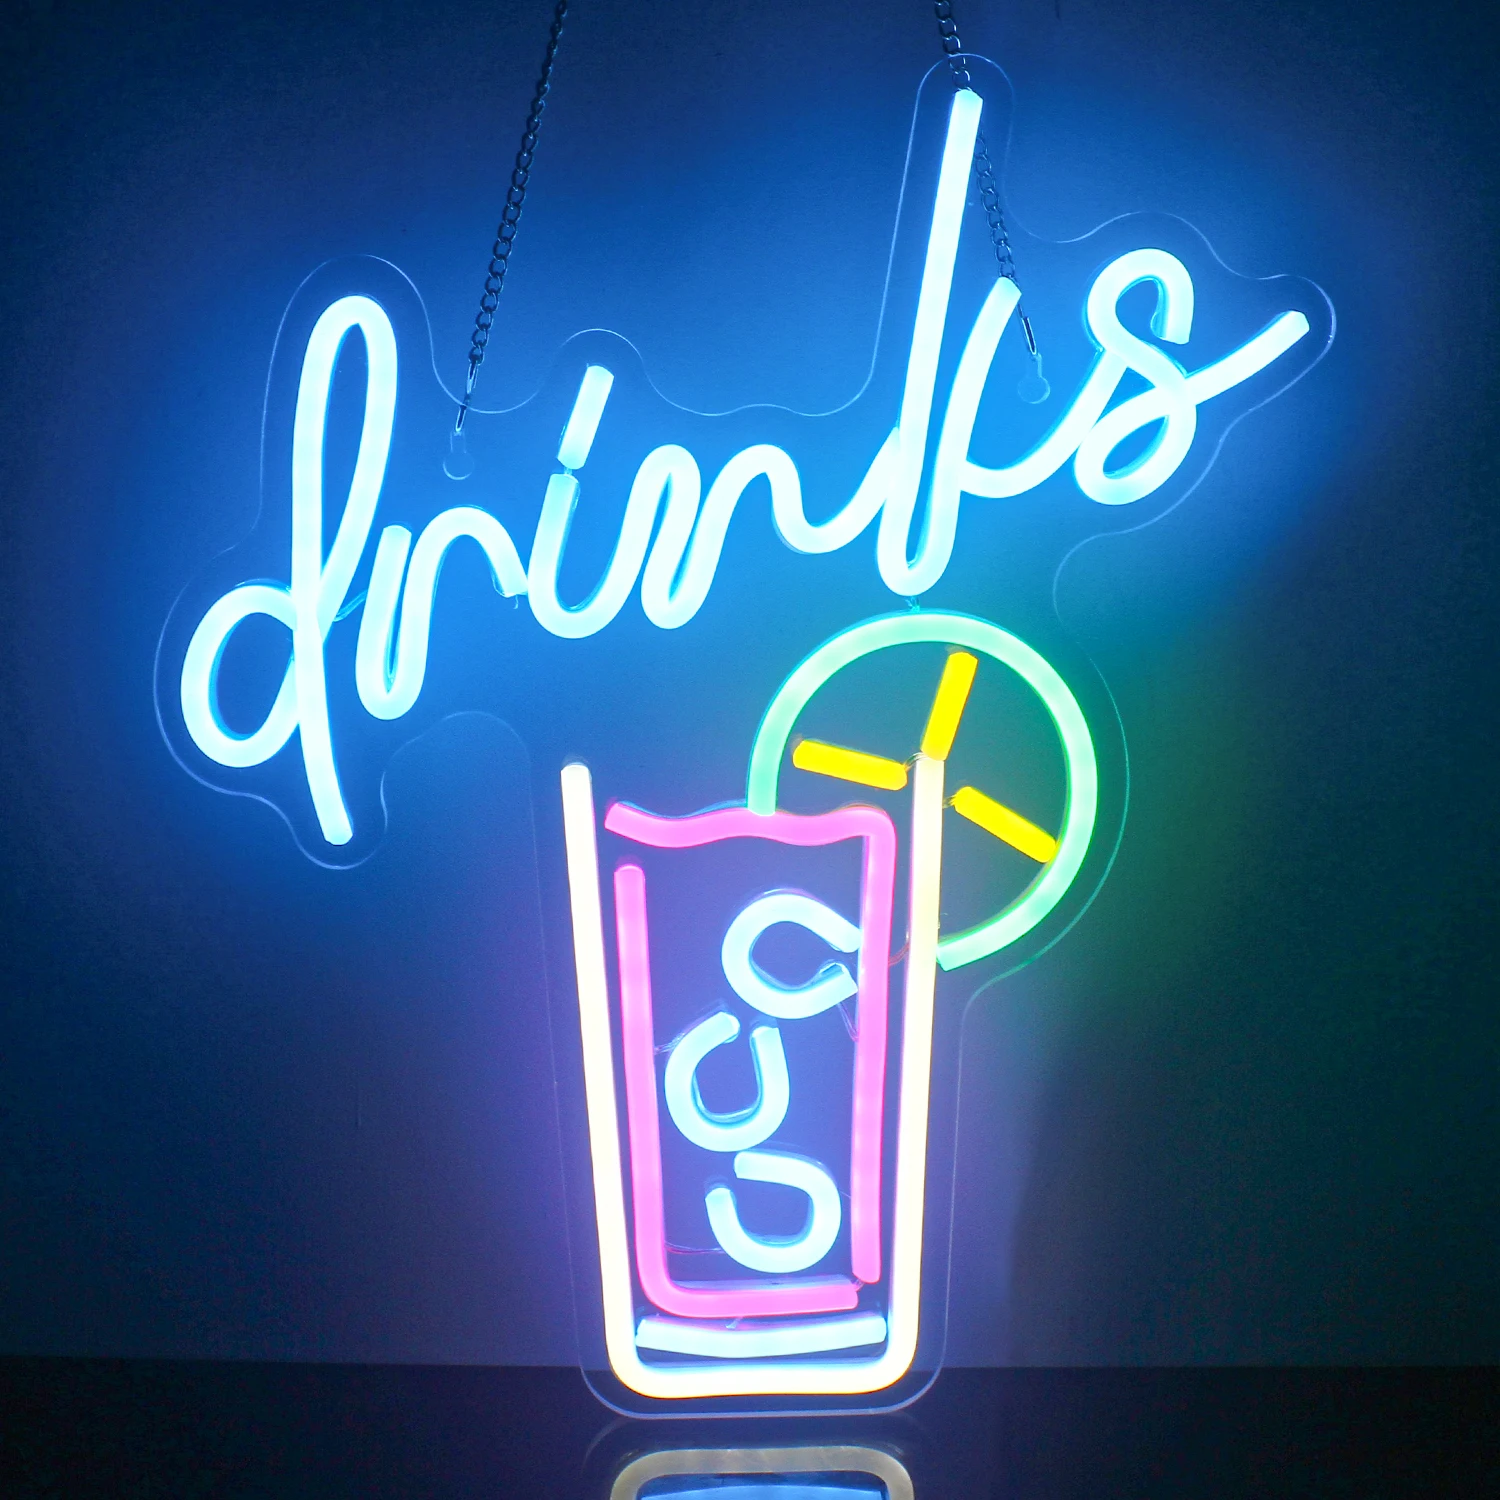 Drinks Neon Signs Cool Drink Cup LED Neon Signs Bar Neon Signs for Wall Decor USB Bar Club Restaurant Cafes Shops Party Neon drinks neon signs cool drink cup led neon signs bar neon signs for wall decor usb bar club restaurant cafes shops party neon